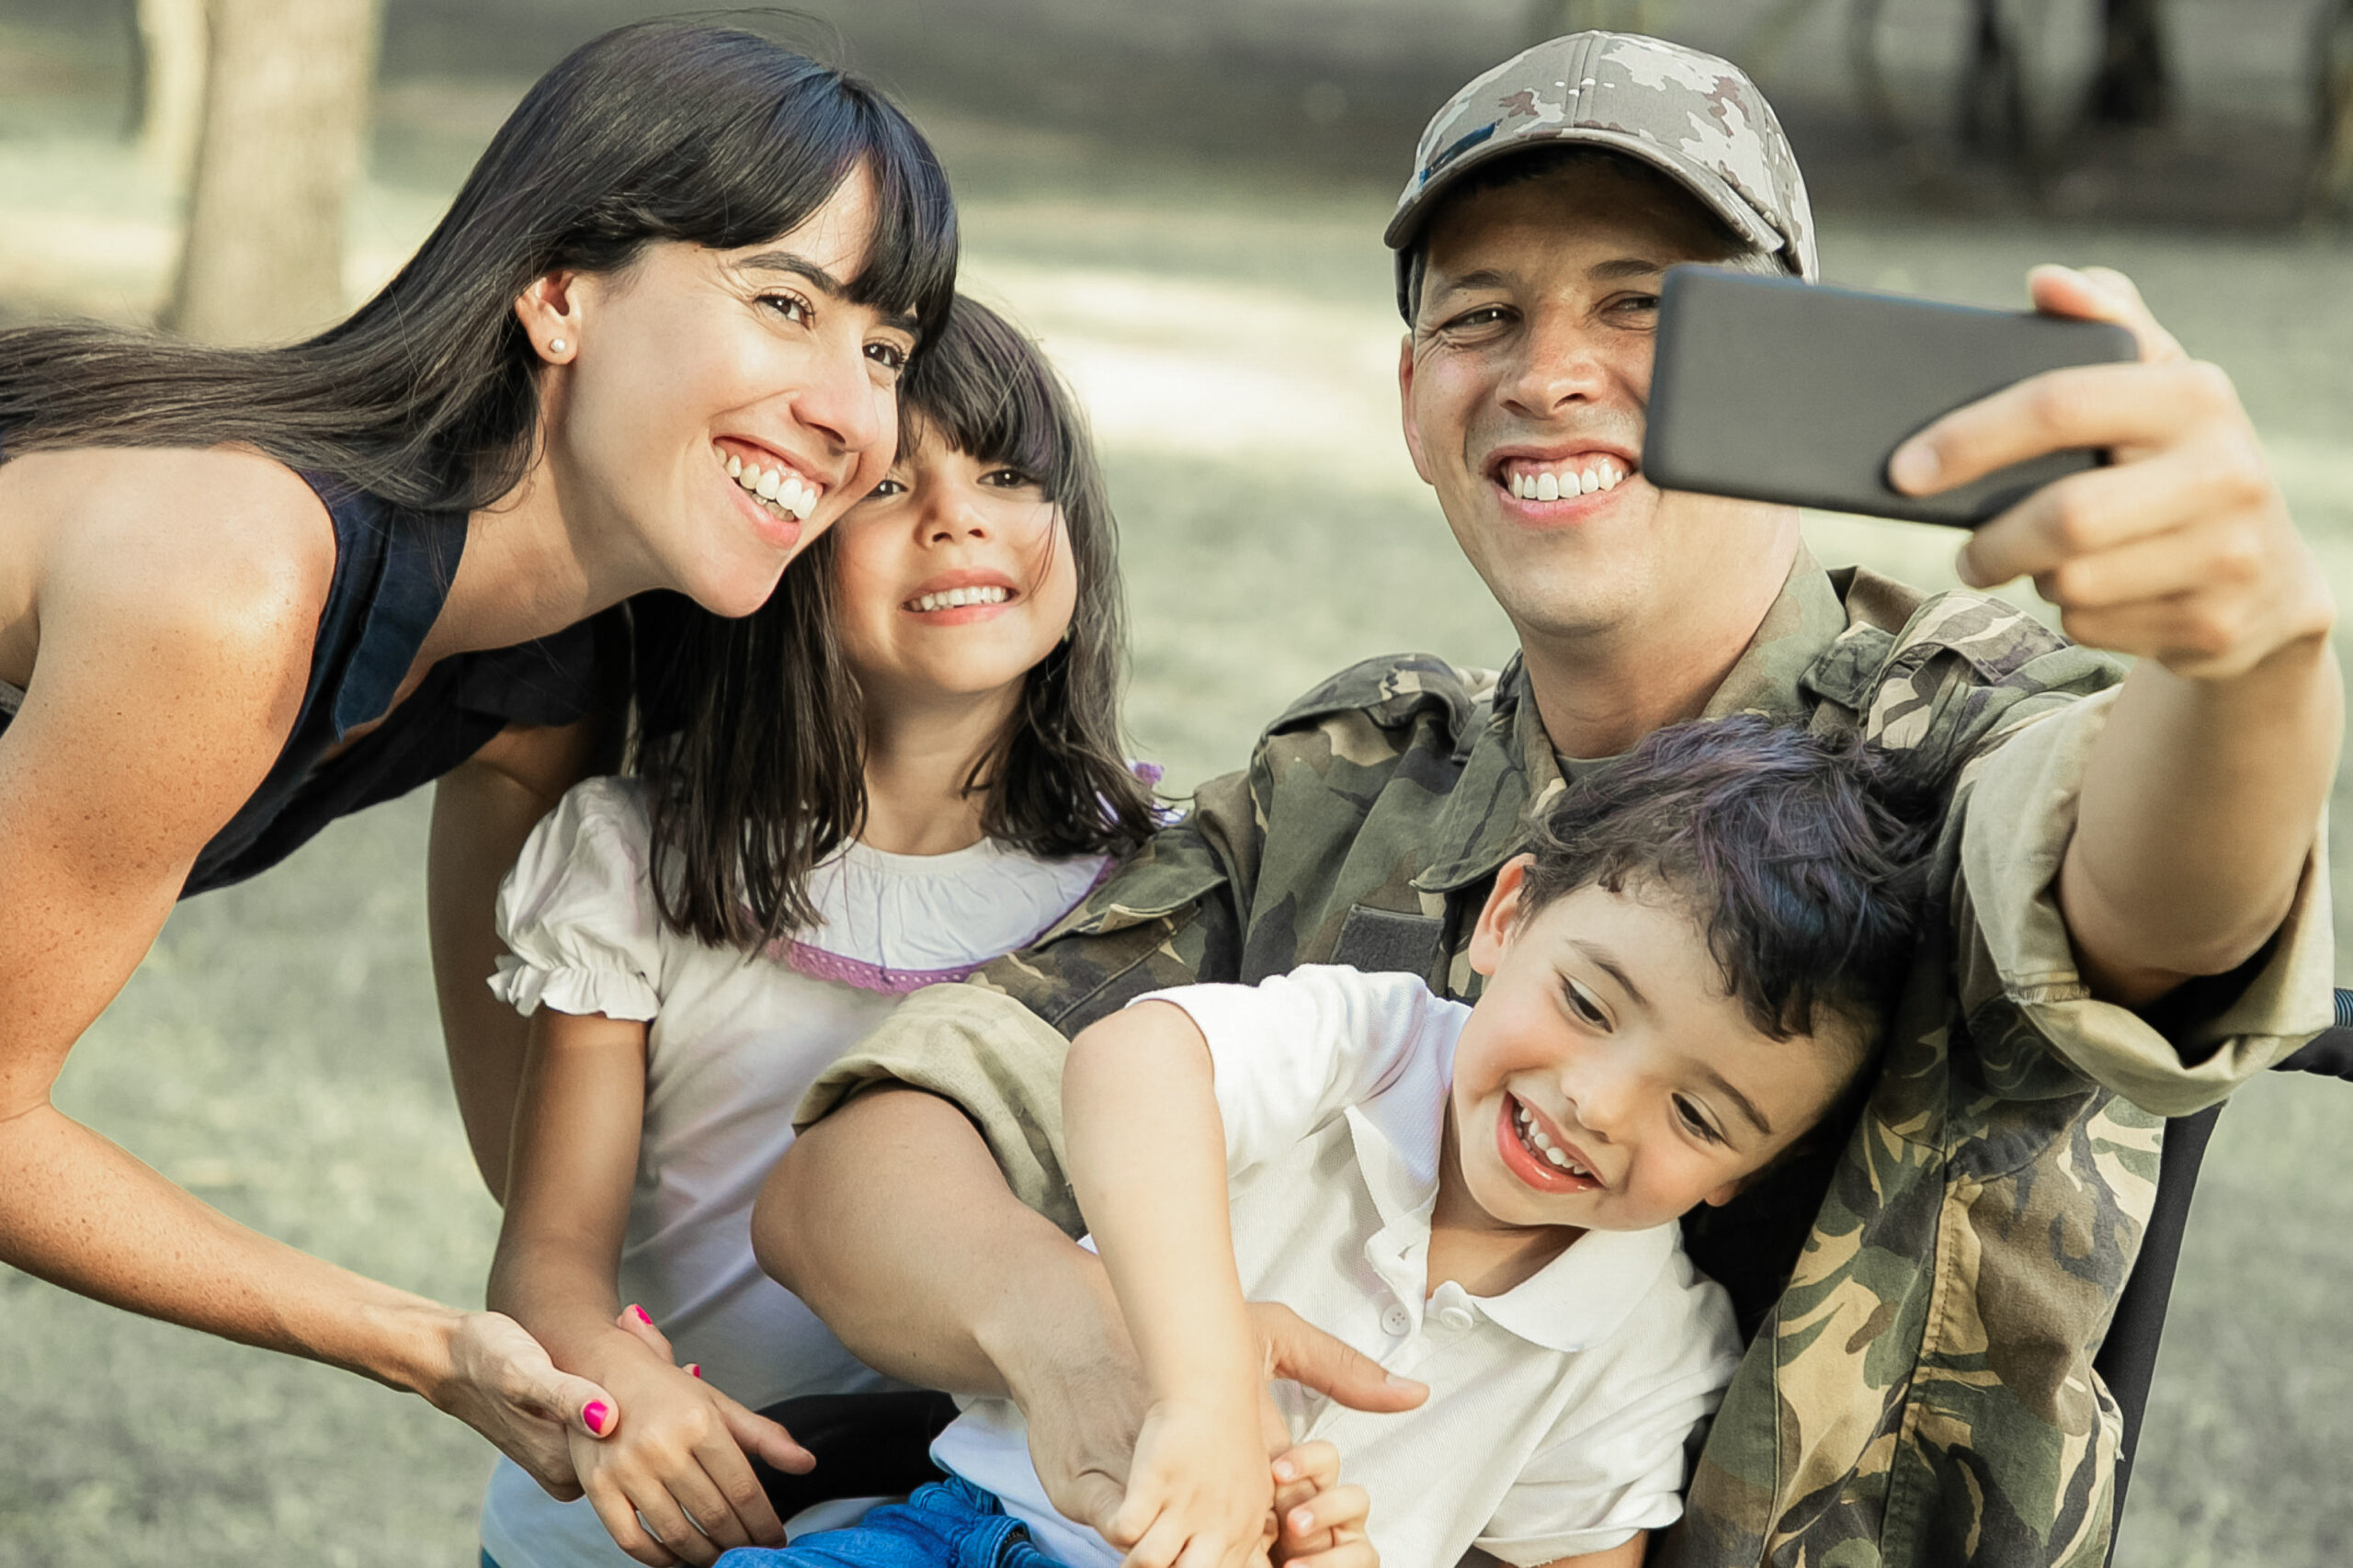 What Kind Of Benefits Are Available For Surviving Spouses Of Veterans?